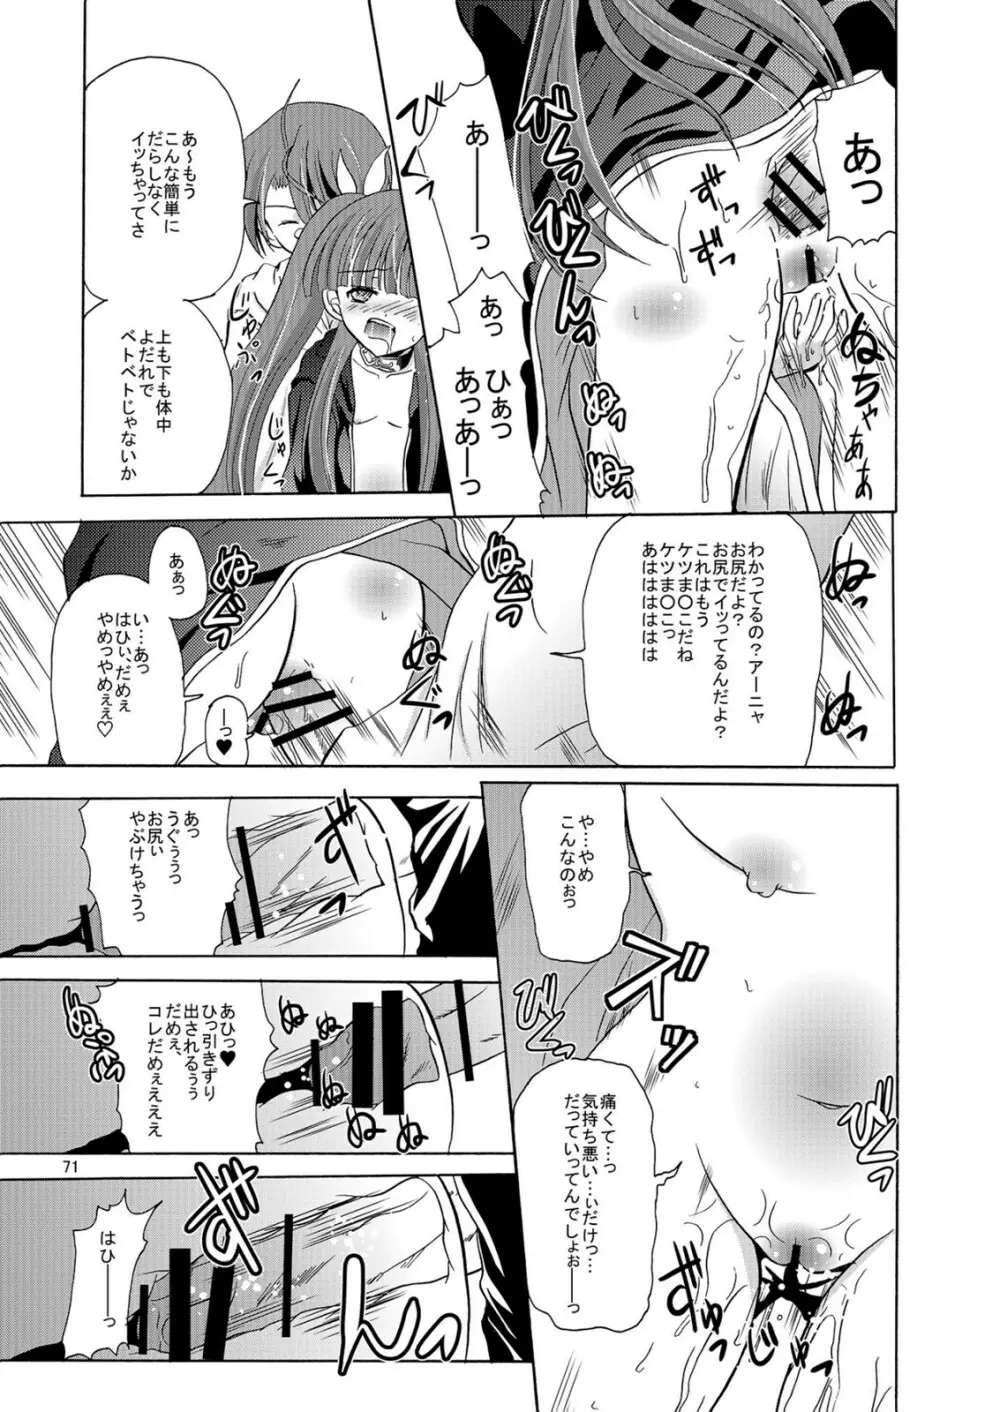 ARCANUMS アーニャ総集編 - page71